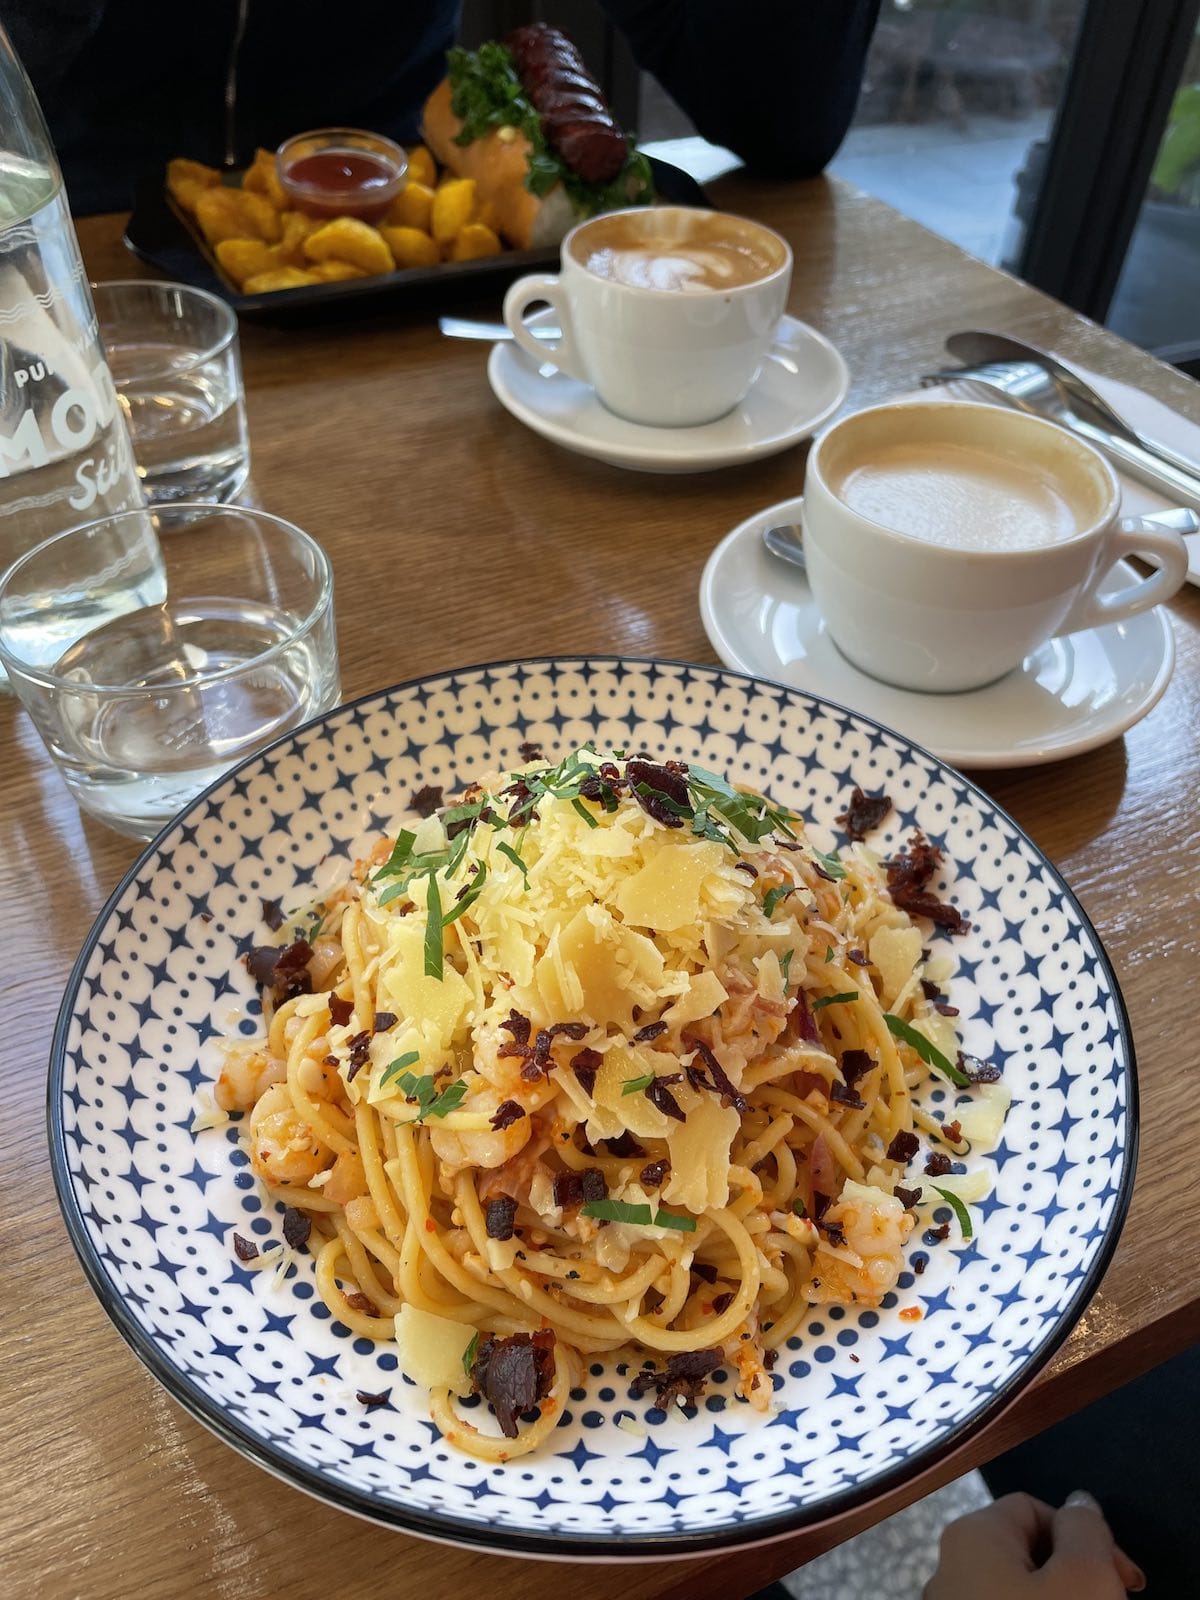 A bowl of spaghetti with chilli, prawn, and parmesan, on a table with some cups of coffee in the background